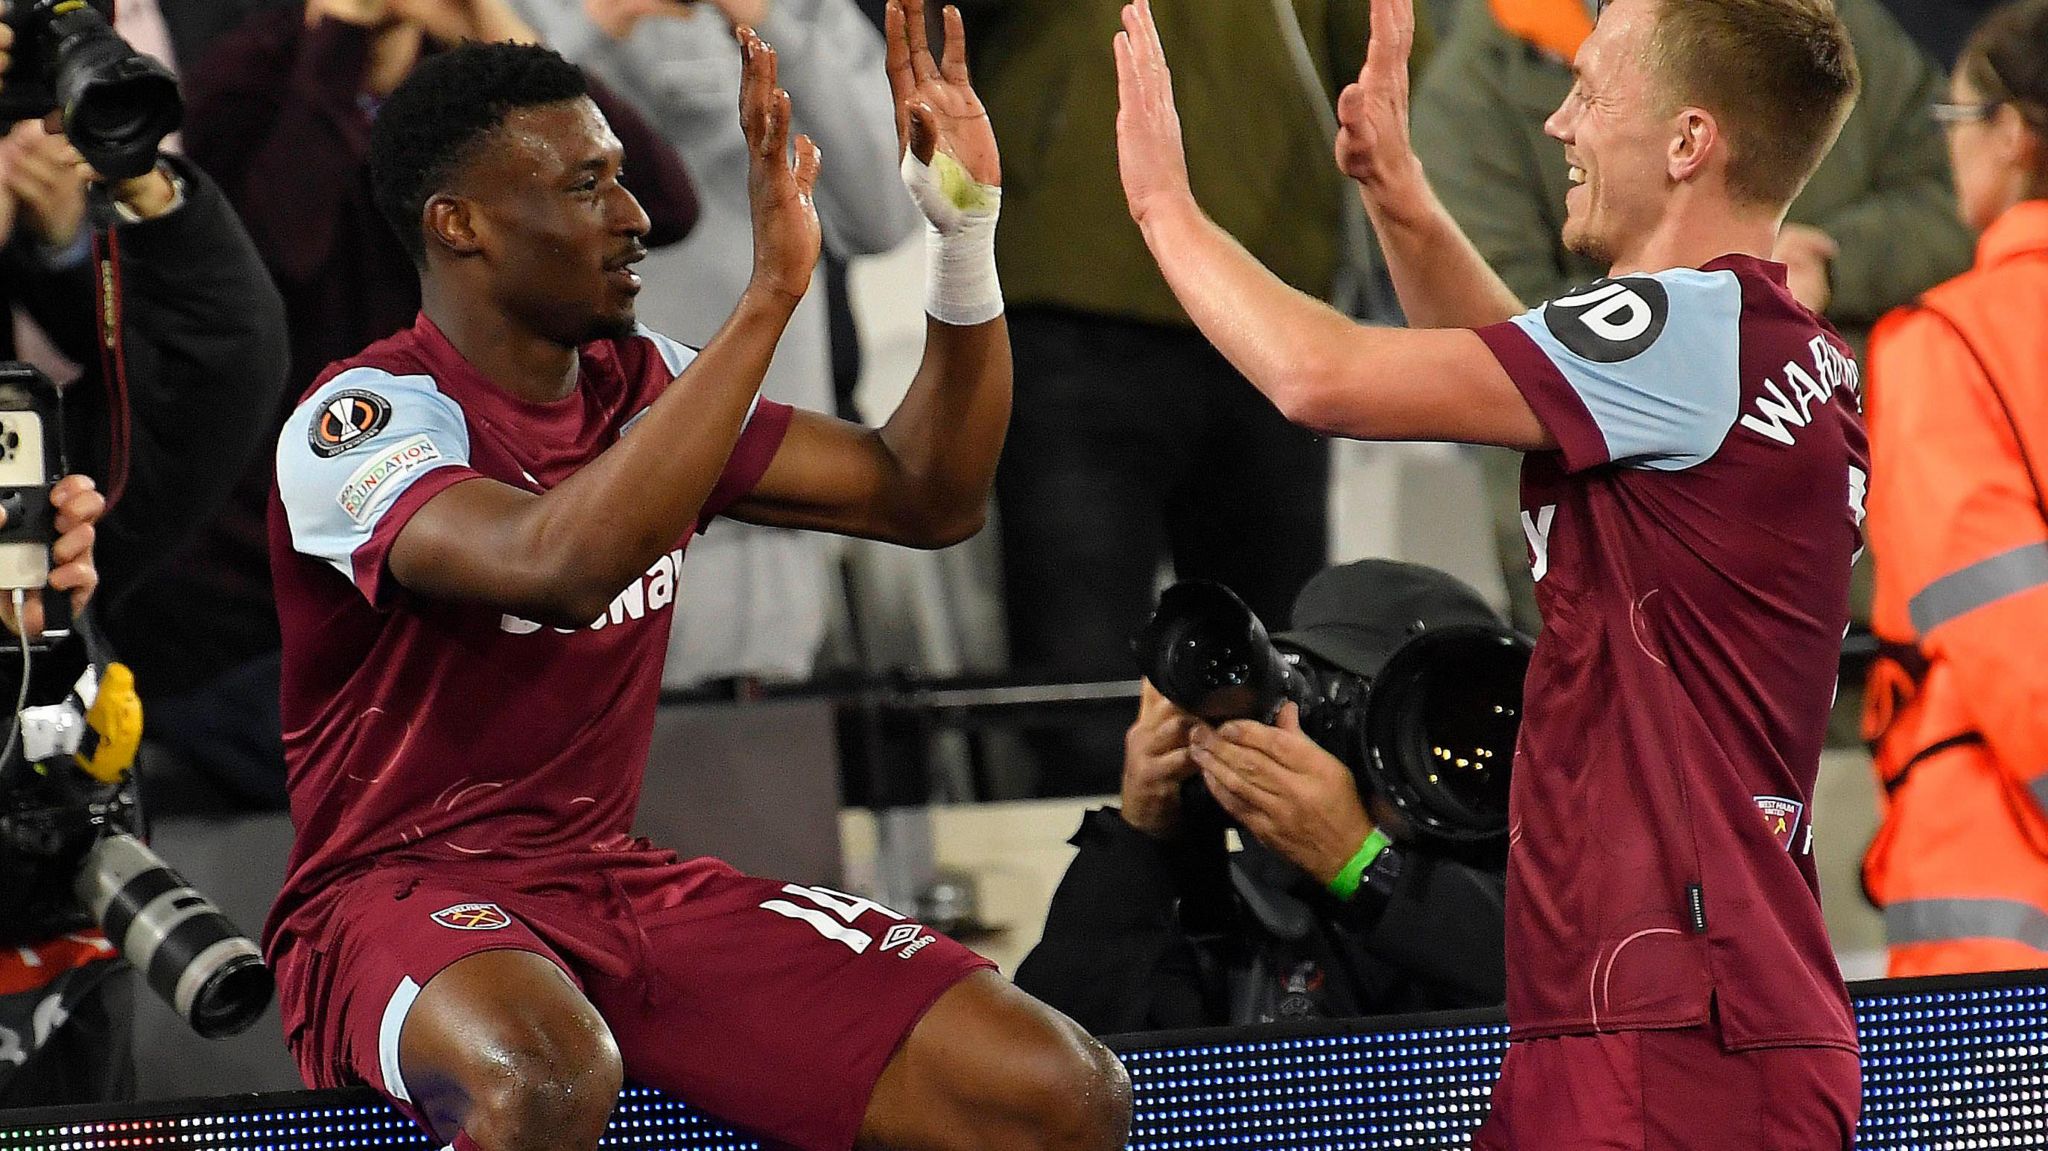 Mohamed Kudus and James Ward Prowse celebrate a goal for West Ham United